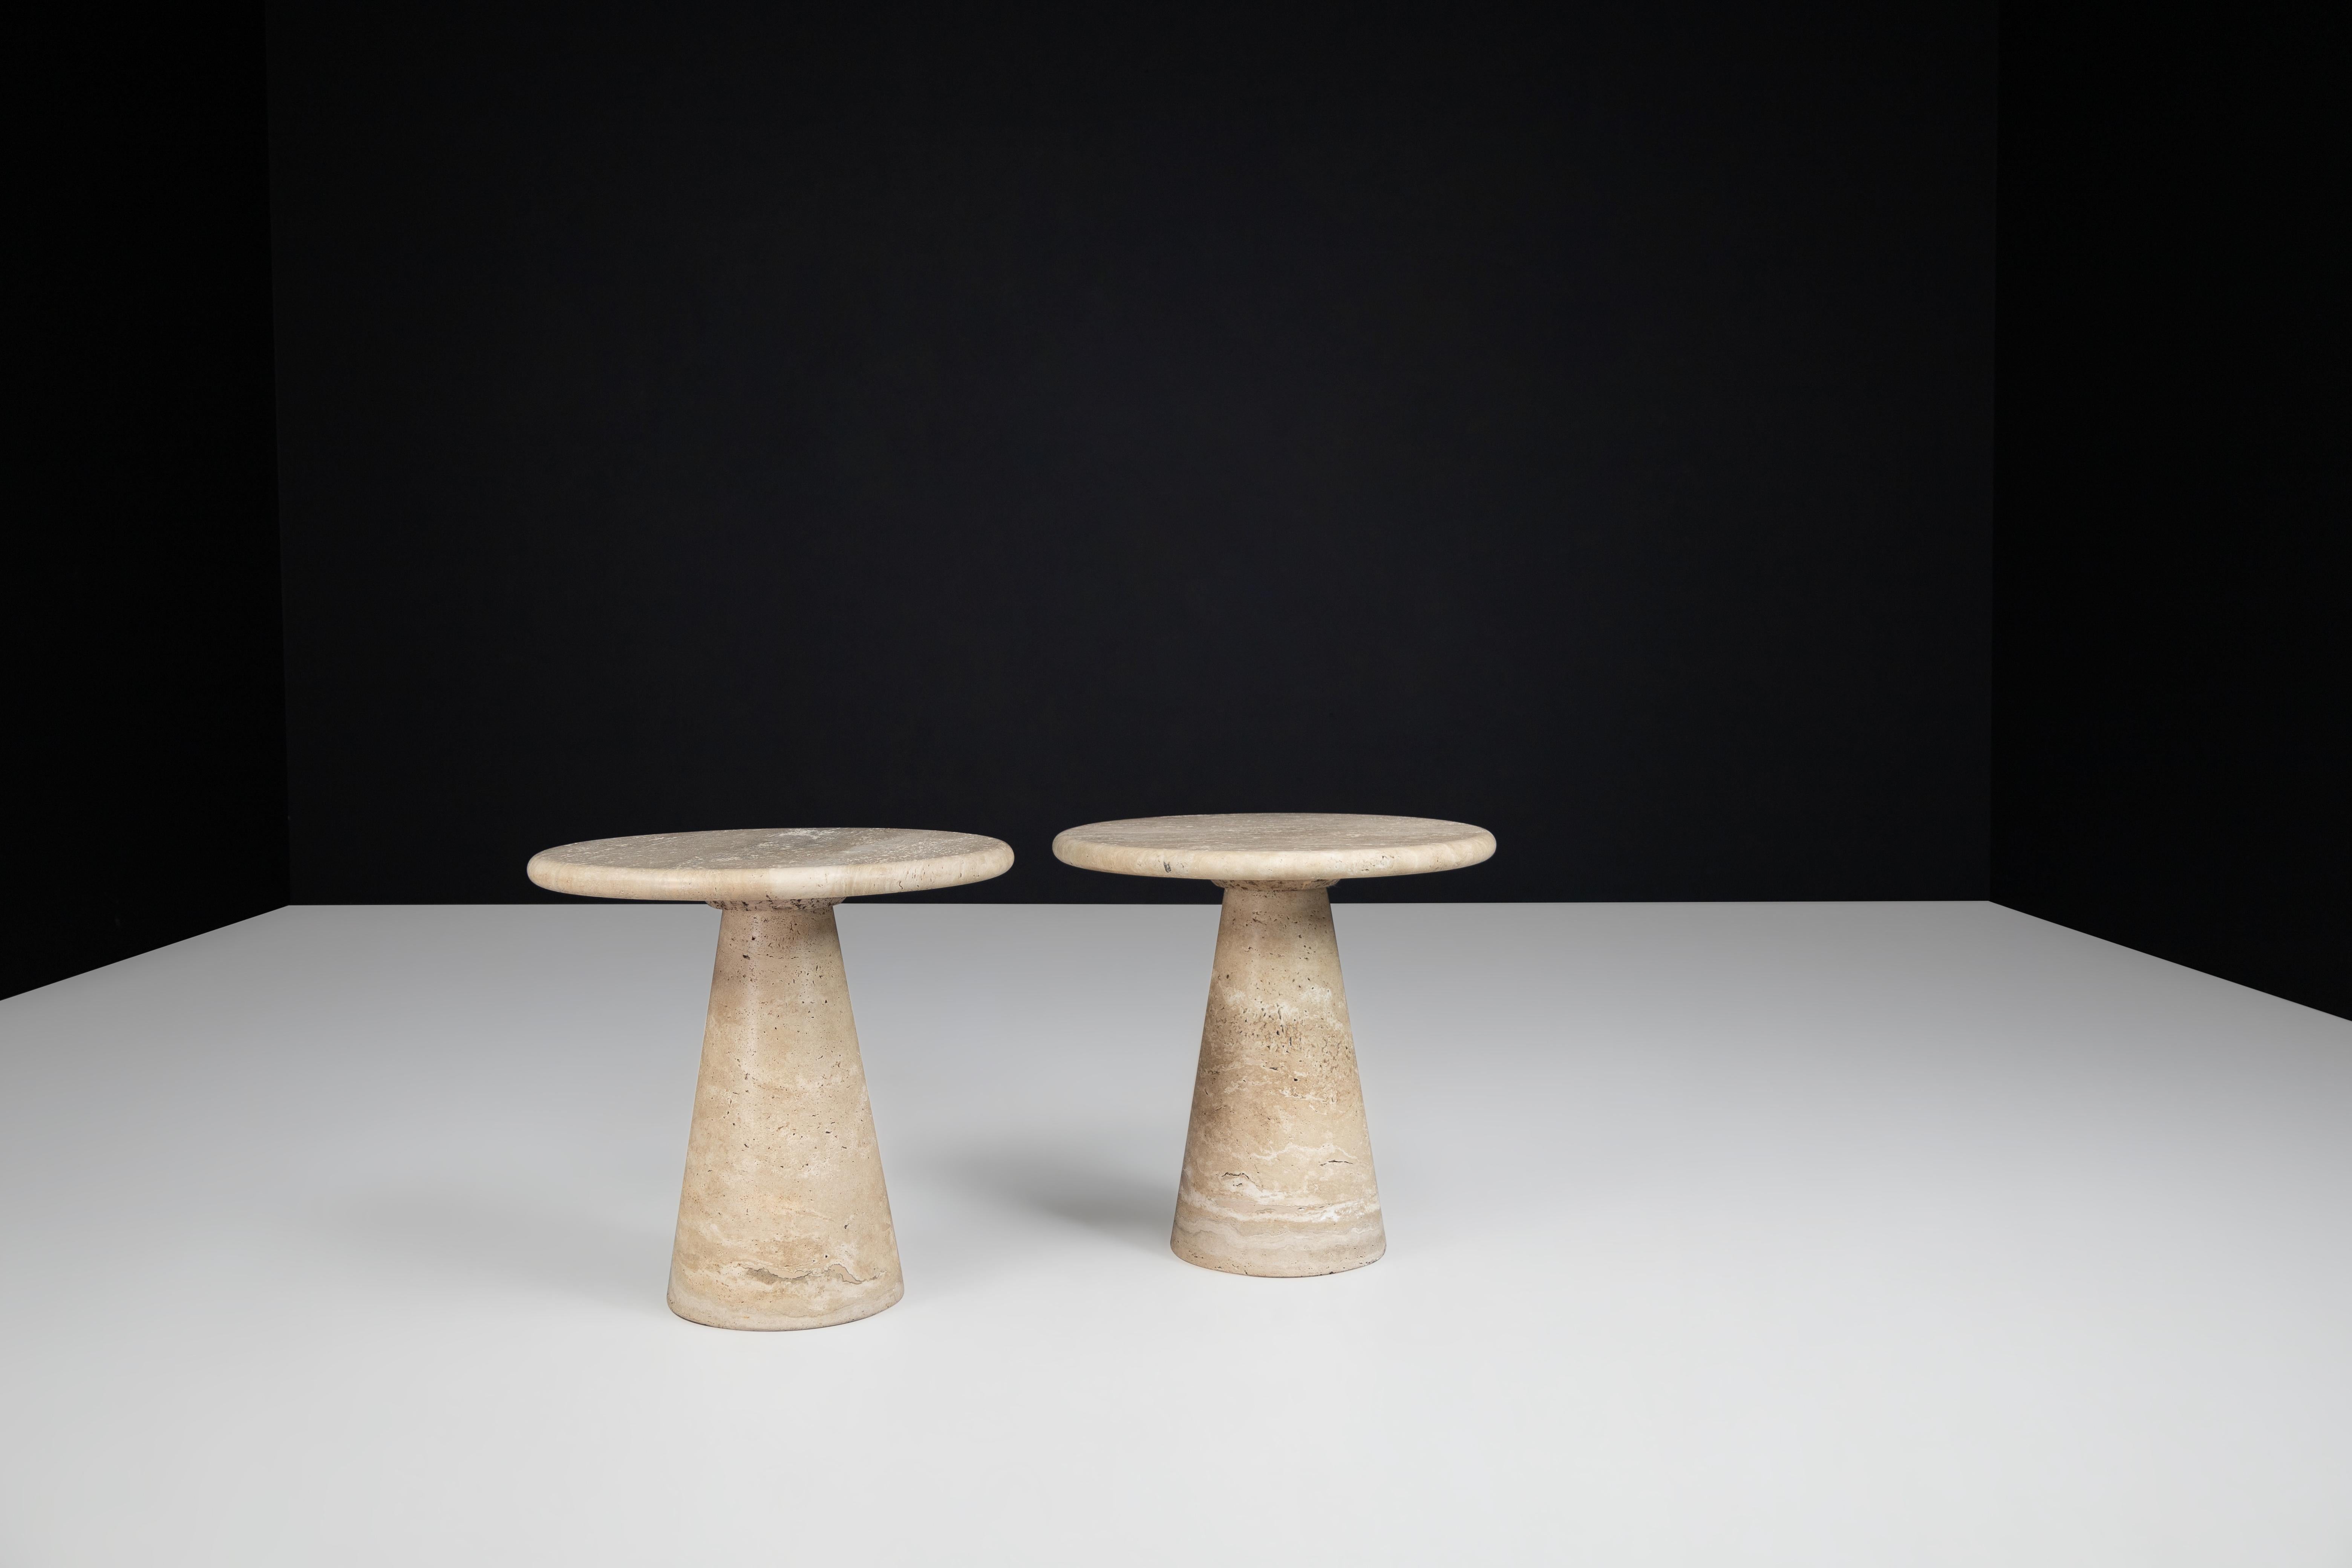  Travertine Circular Side Tables or Coffee Tables, Italy, 1980s  For Sale 9